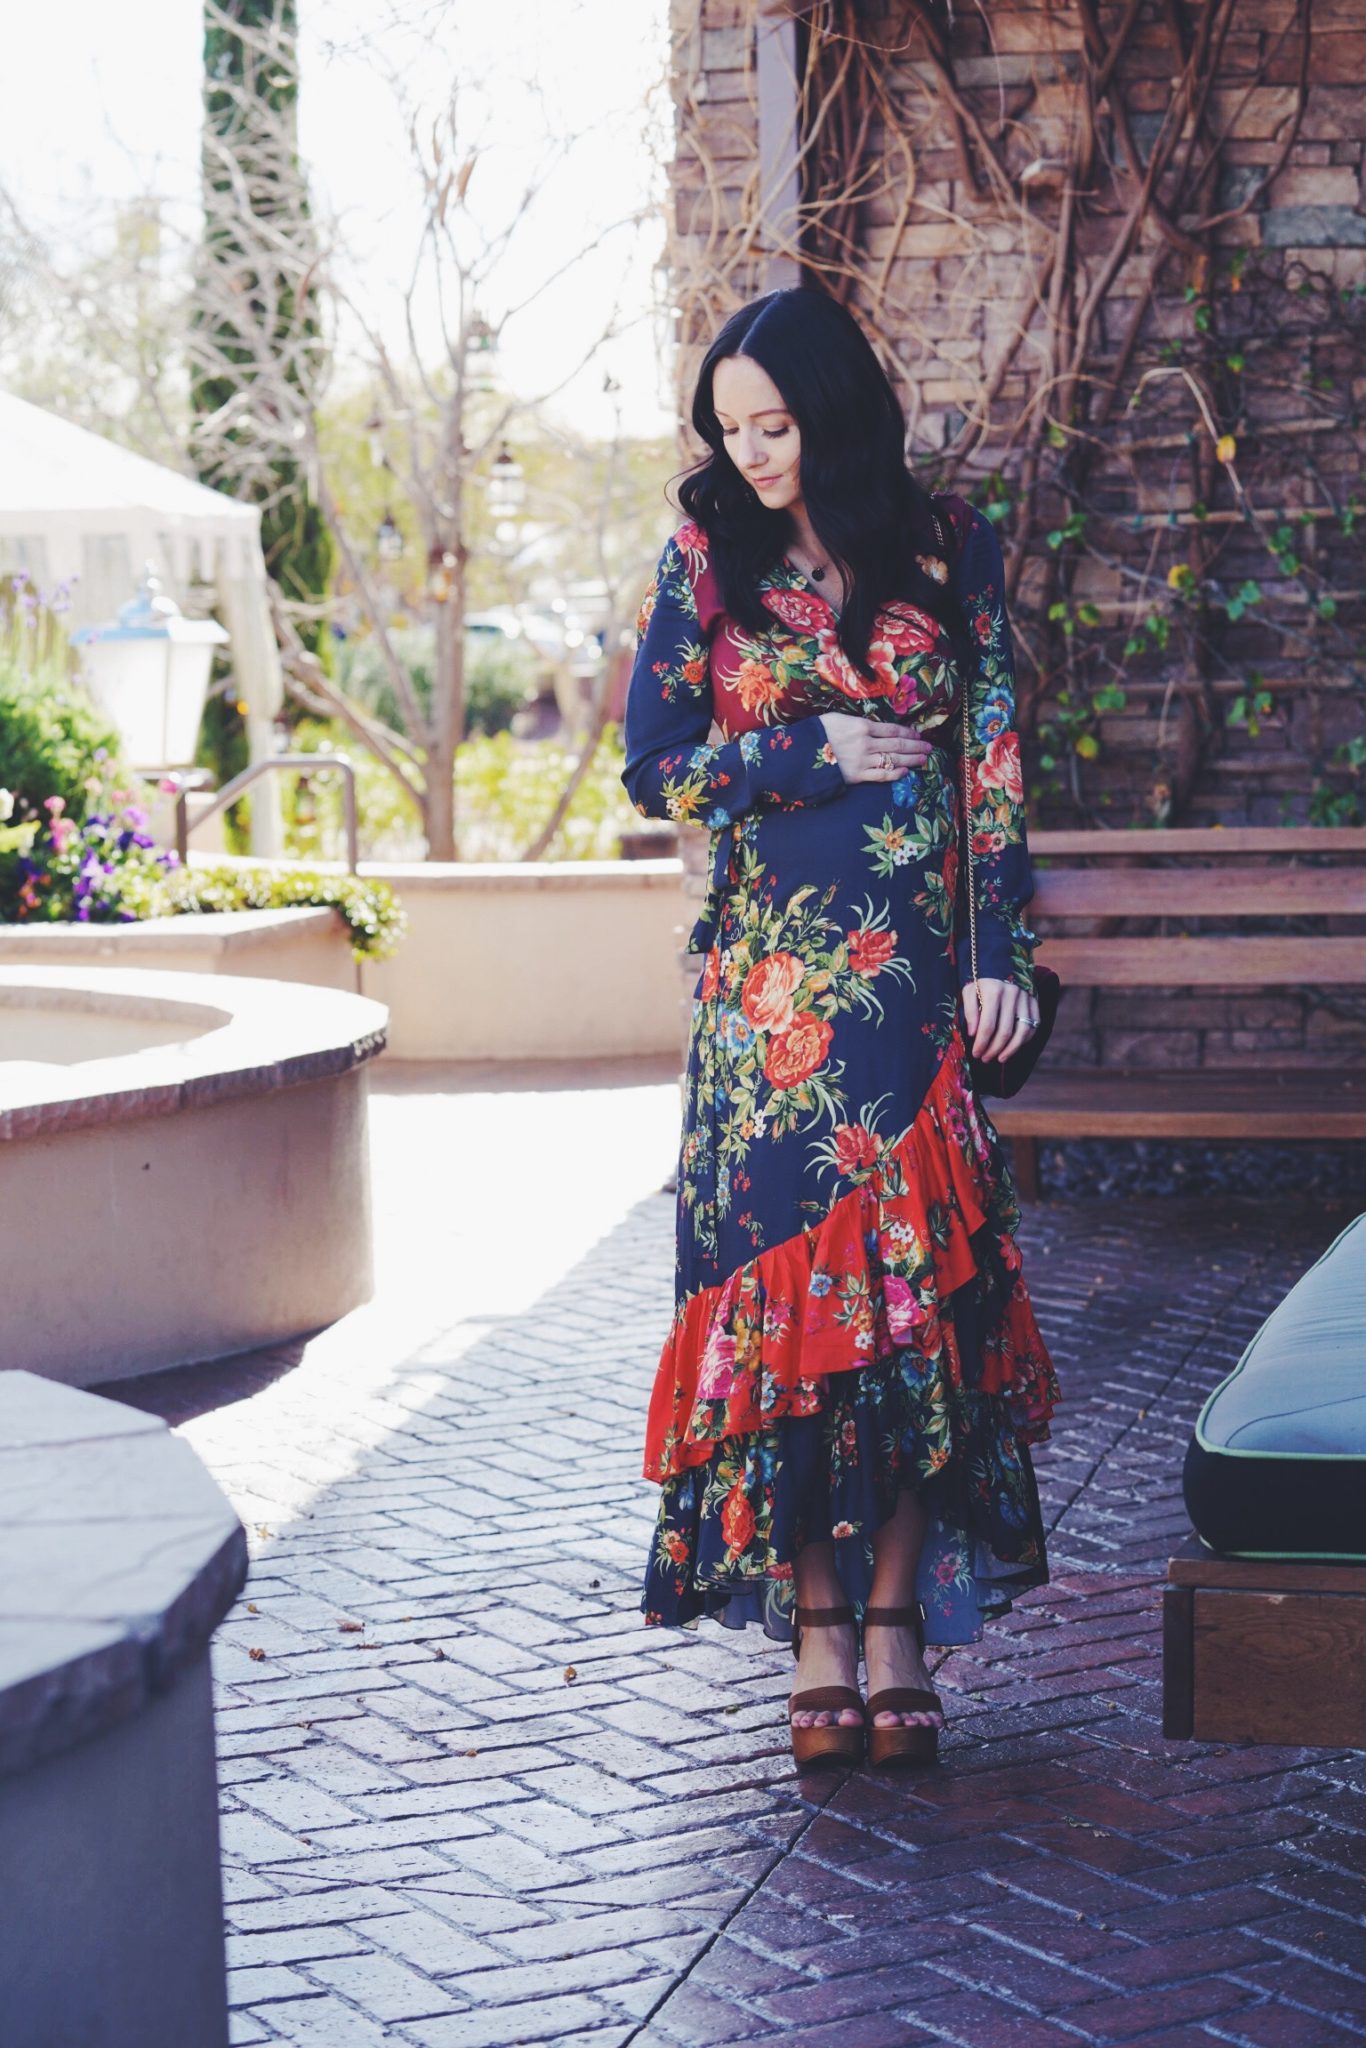 Spring Florals For Your Wardrobe & Home by popular Las Vegas fashion blogger Outfits & Outings